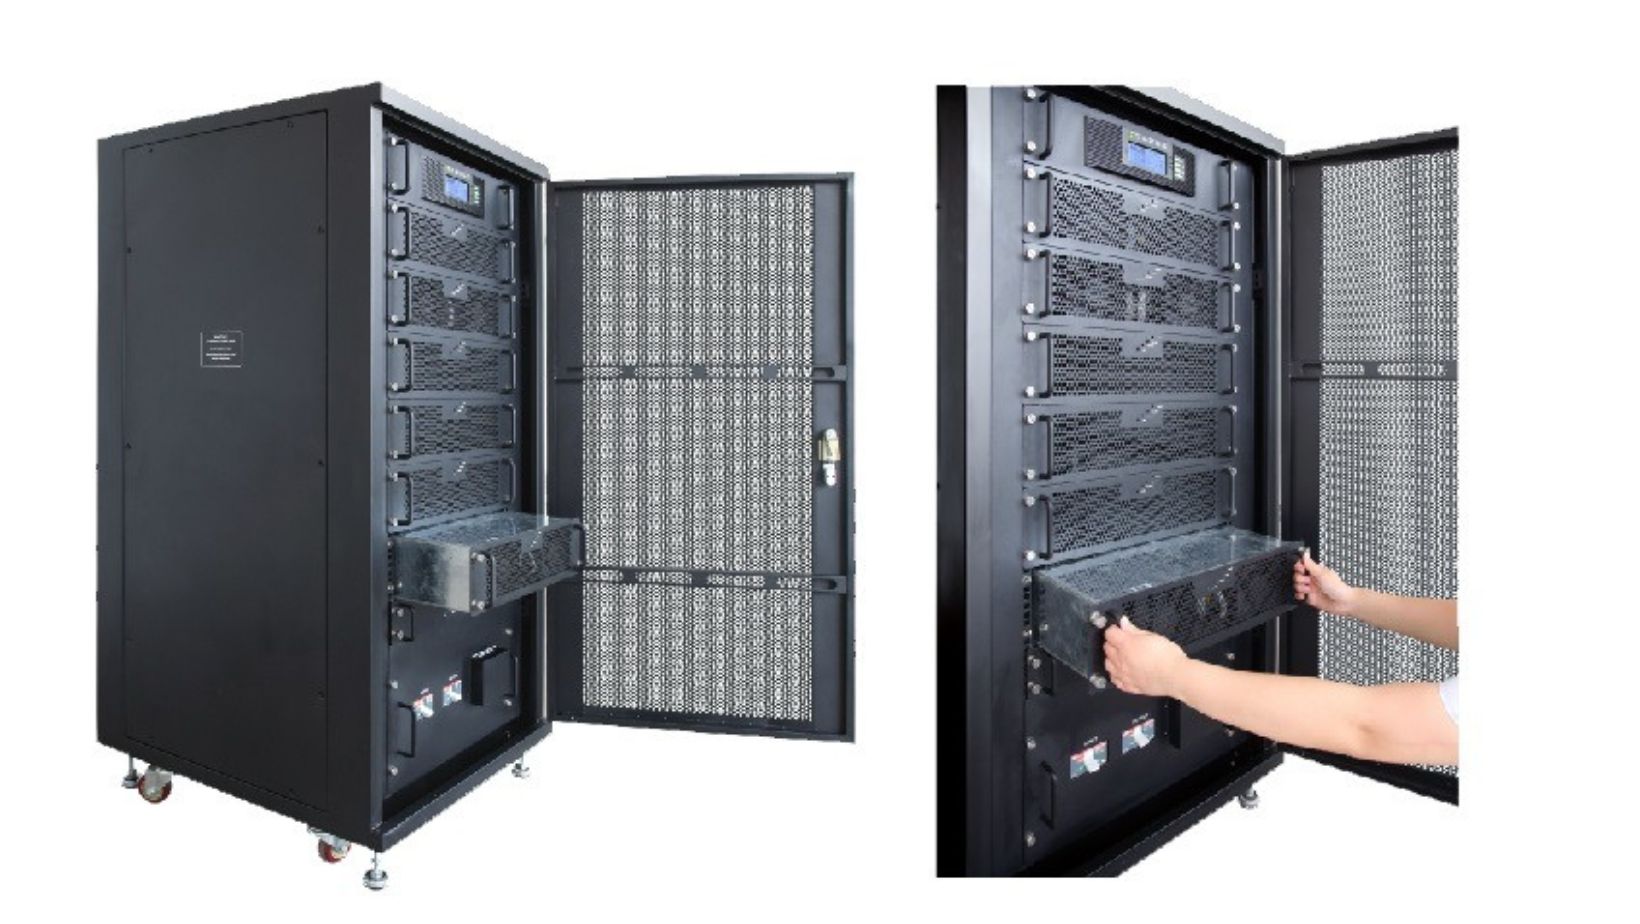 Cost-Effectiveness and Operational Benefits of Modular UPS